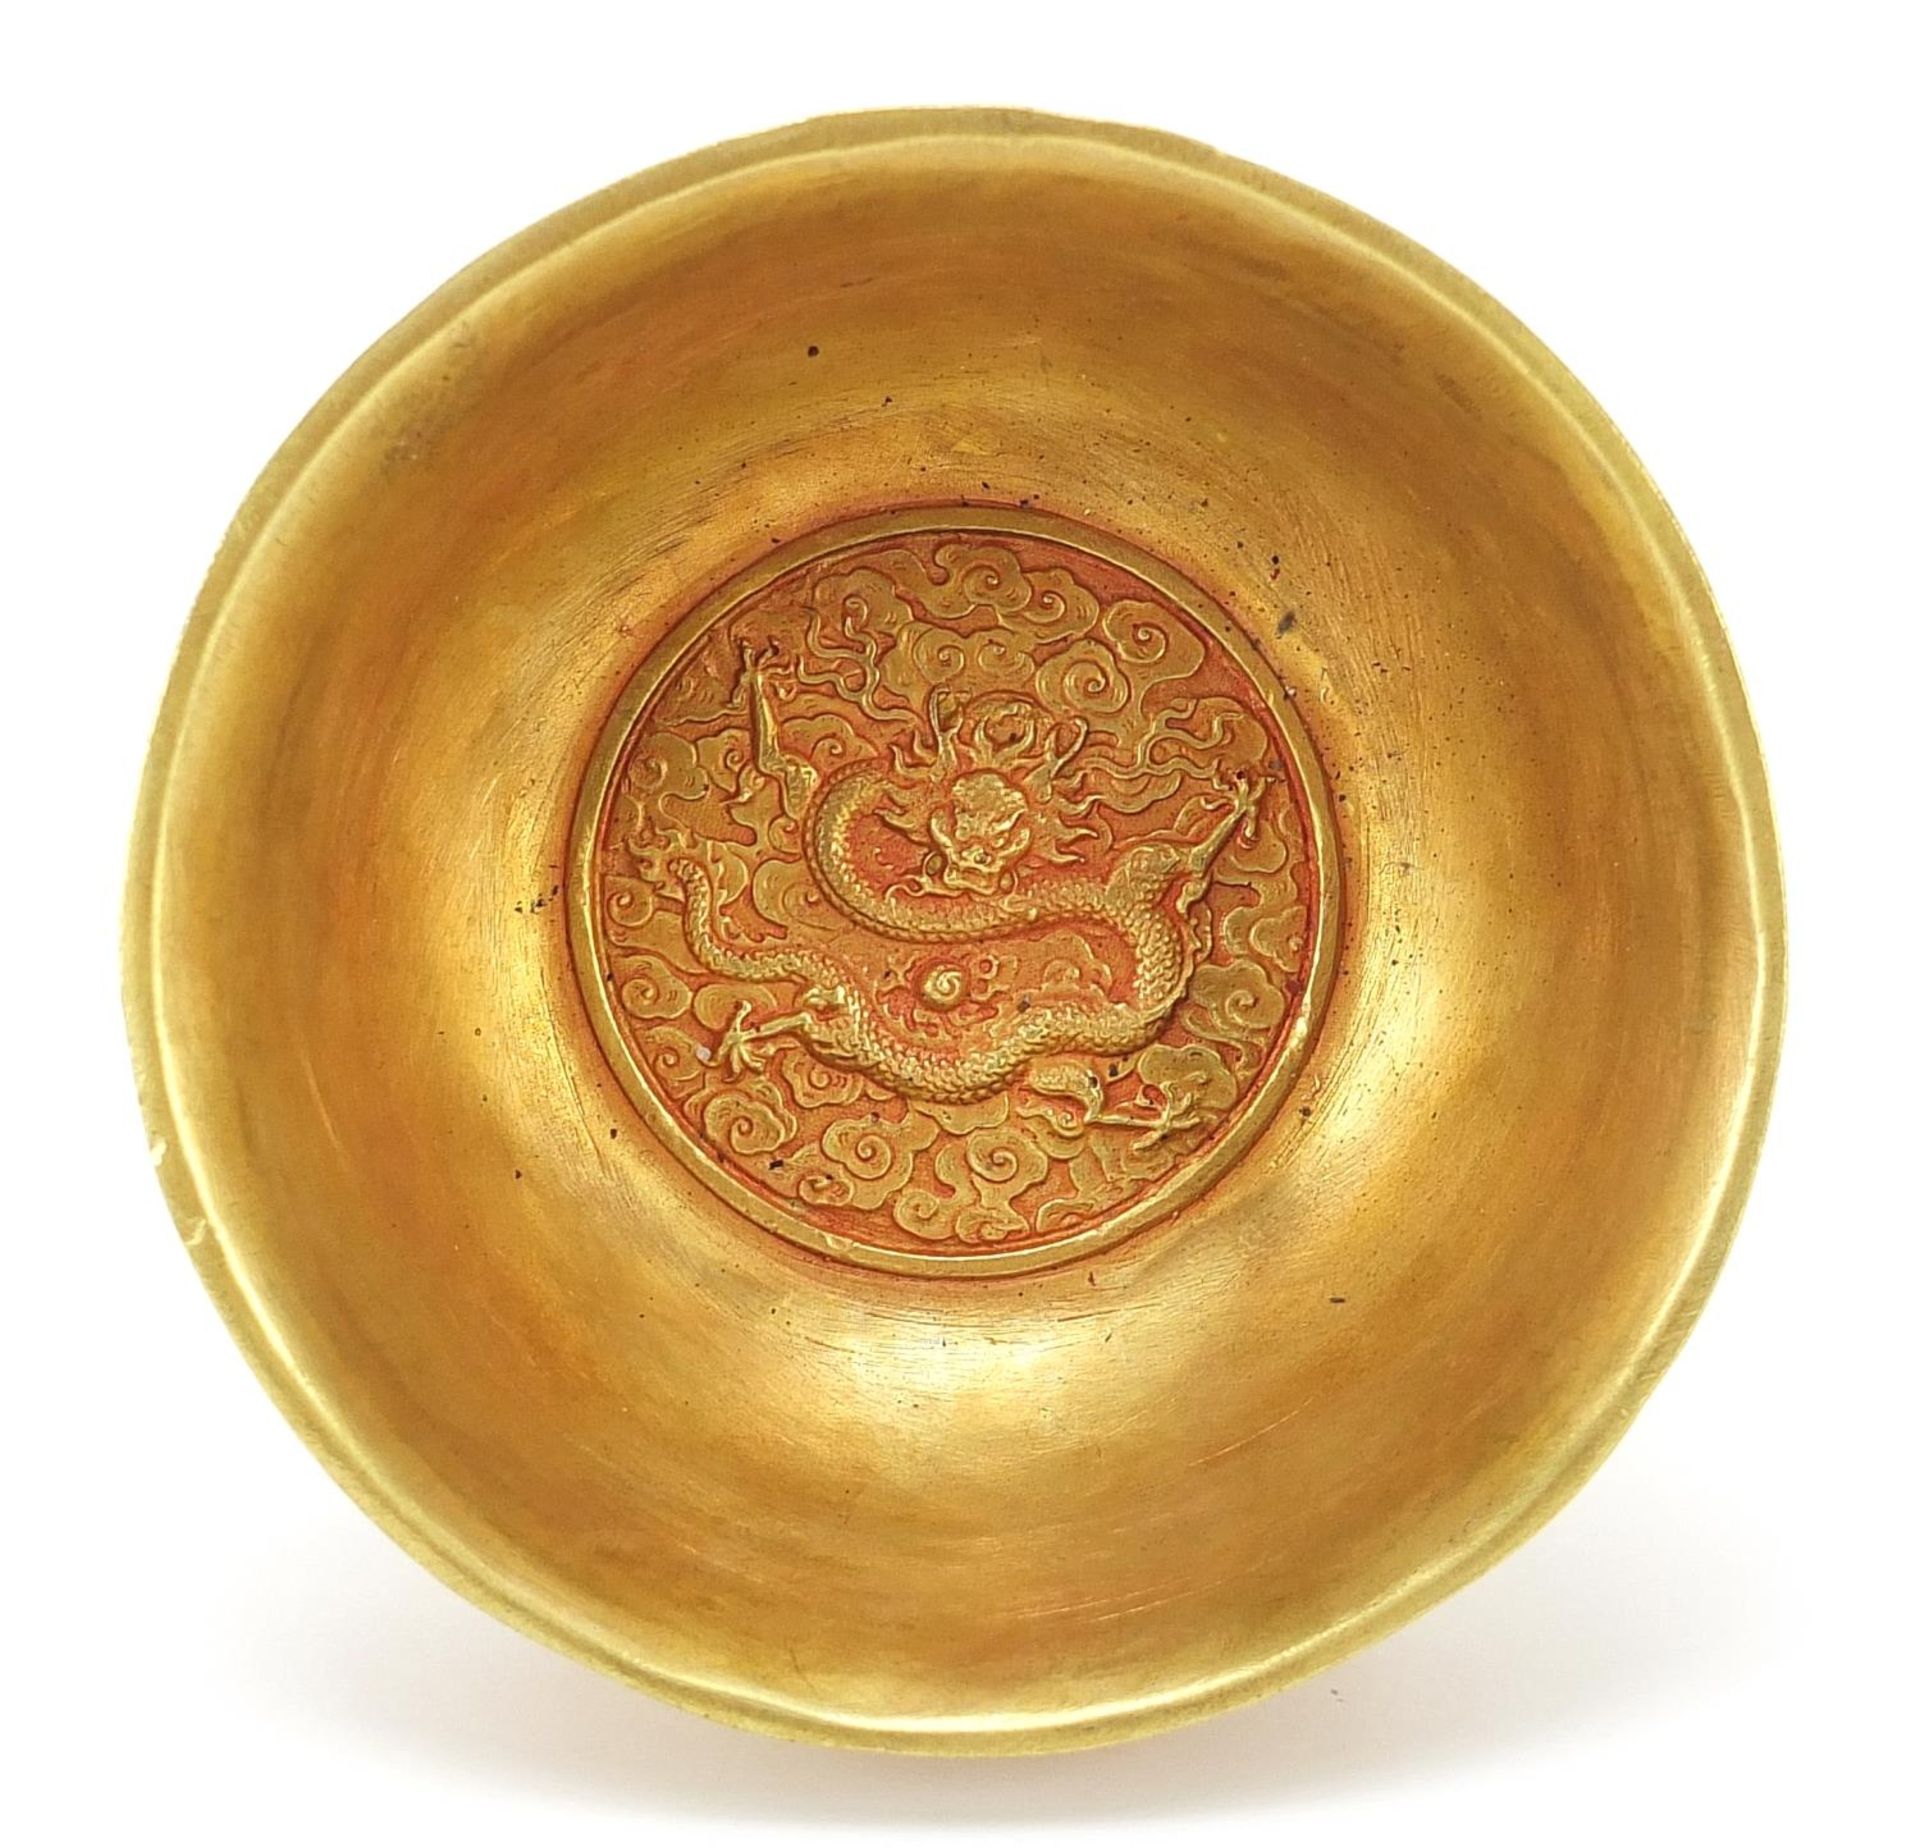 Chinese gilt bronze footed bowl cast with dragons amongst clouds chasing flaming pearls, four figure - Image 3 of 4